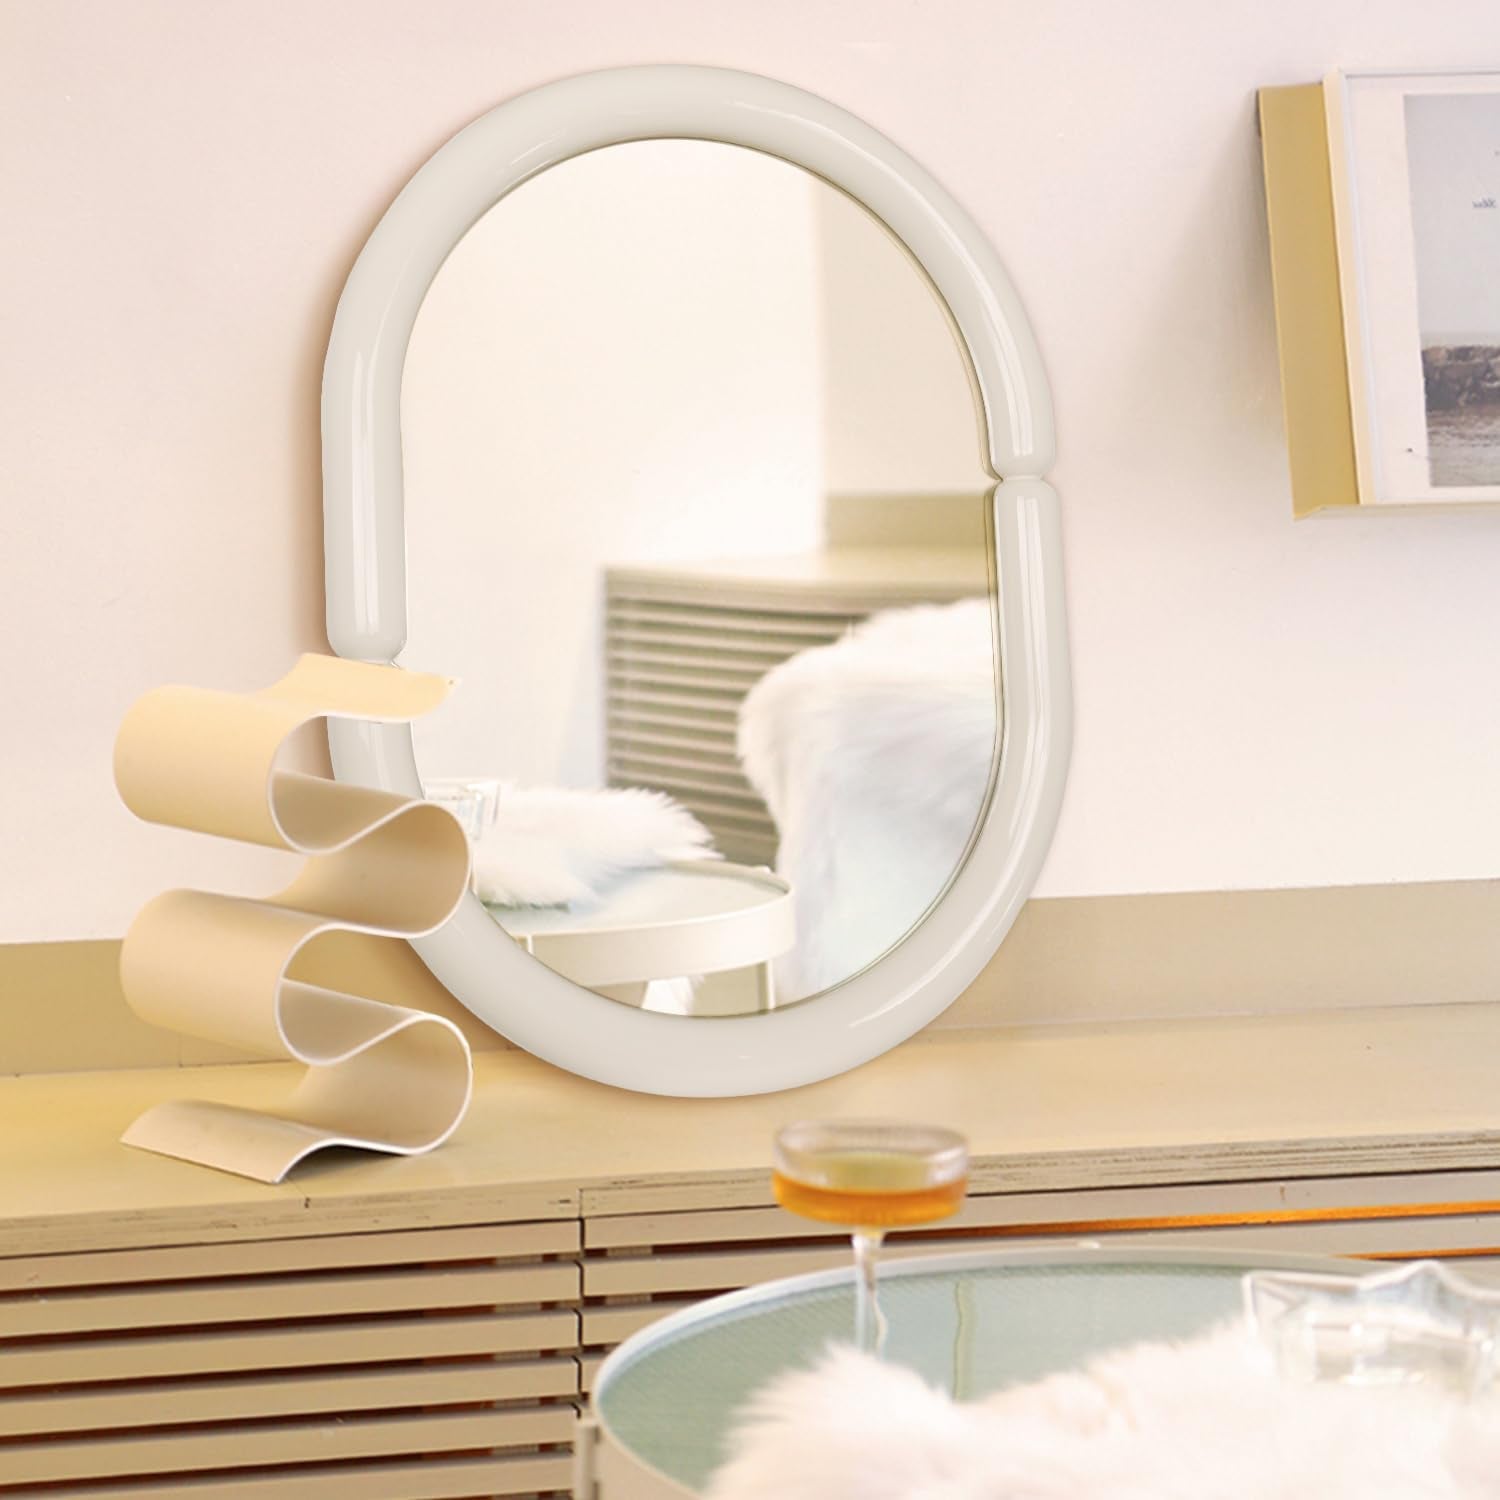 Contemporary Bagel-Shaped Wall Mirror with Candy-Colored Futuristic Design - 32'X23' Cream White